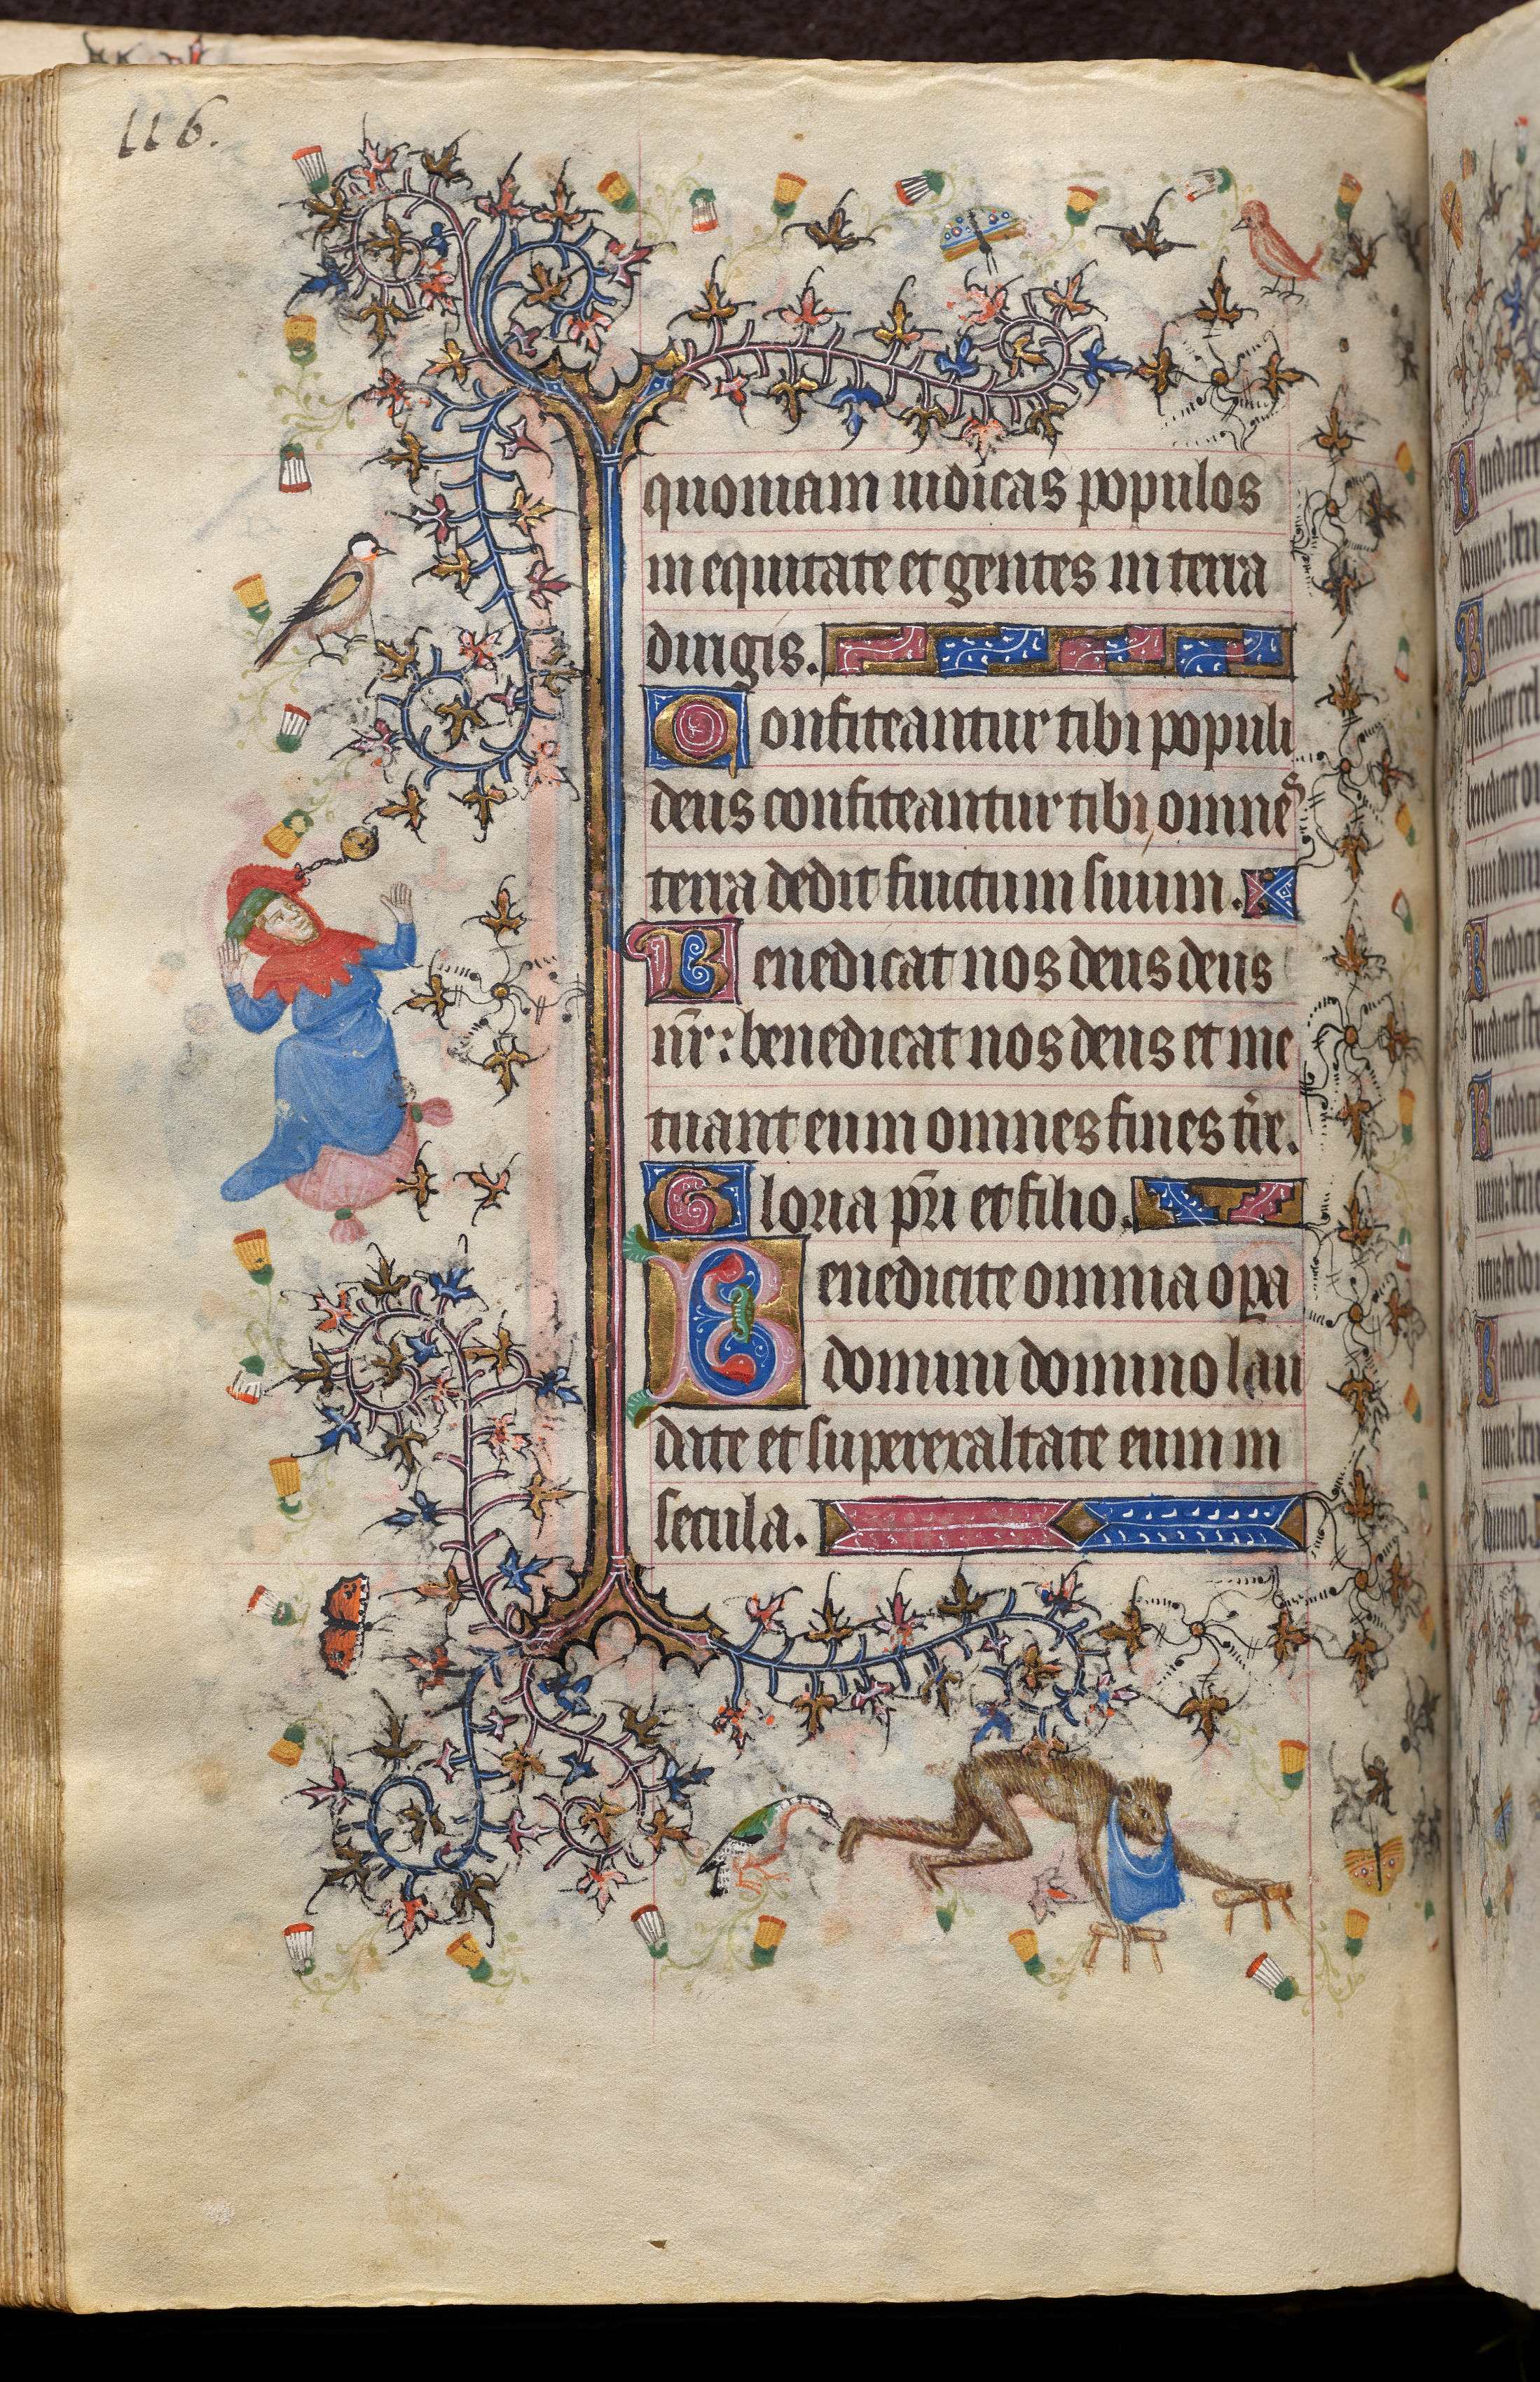 Hours of Charles the Noble, King of Navarre (1361-1425): fol. 58v, Text